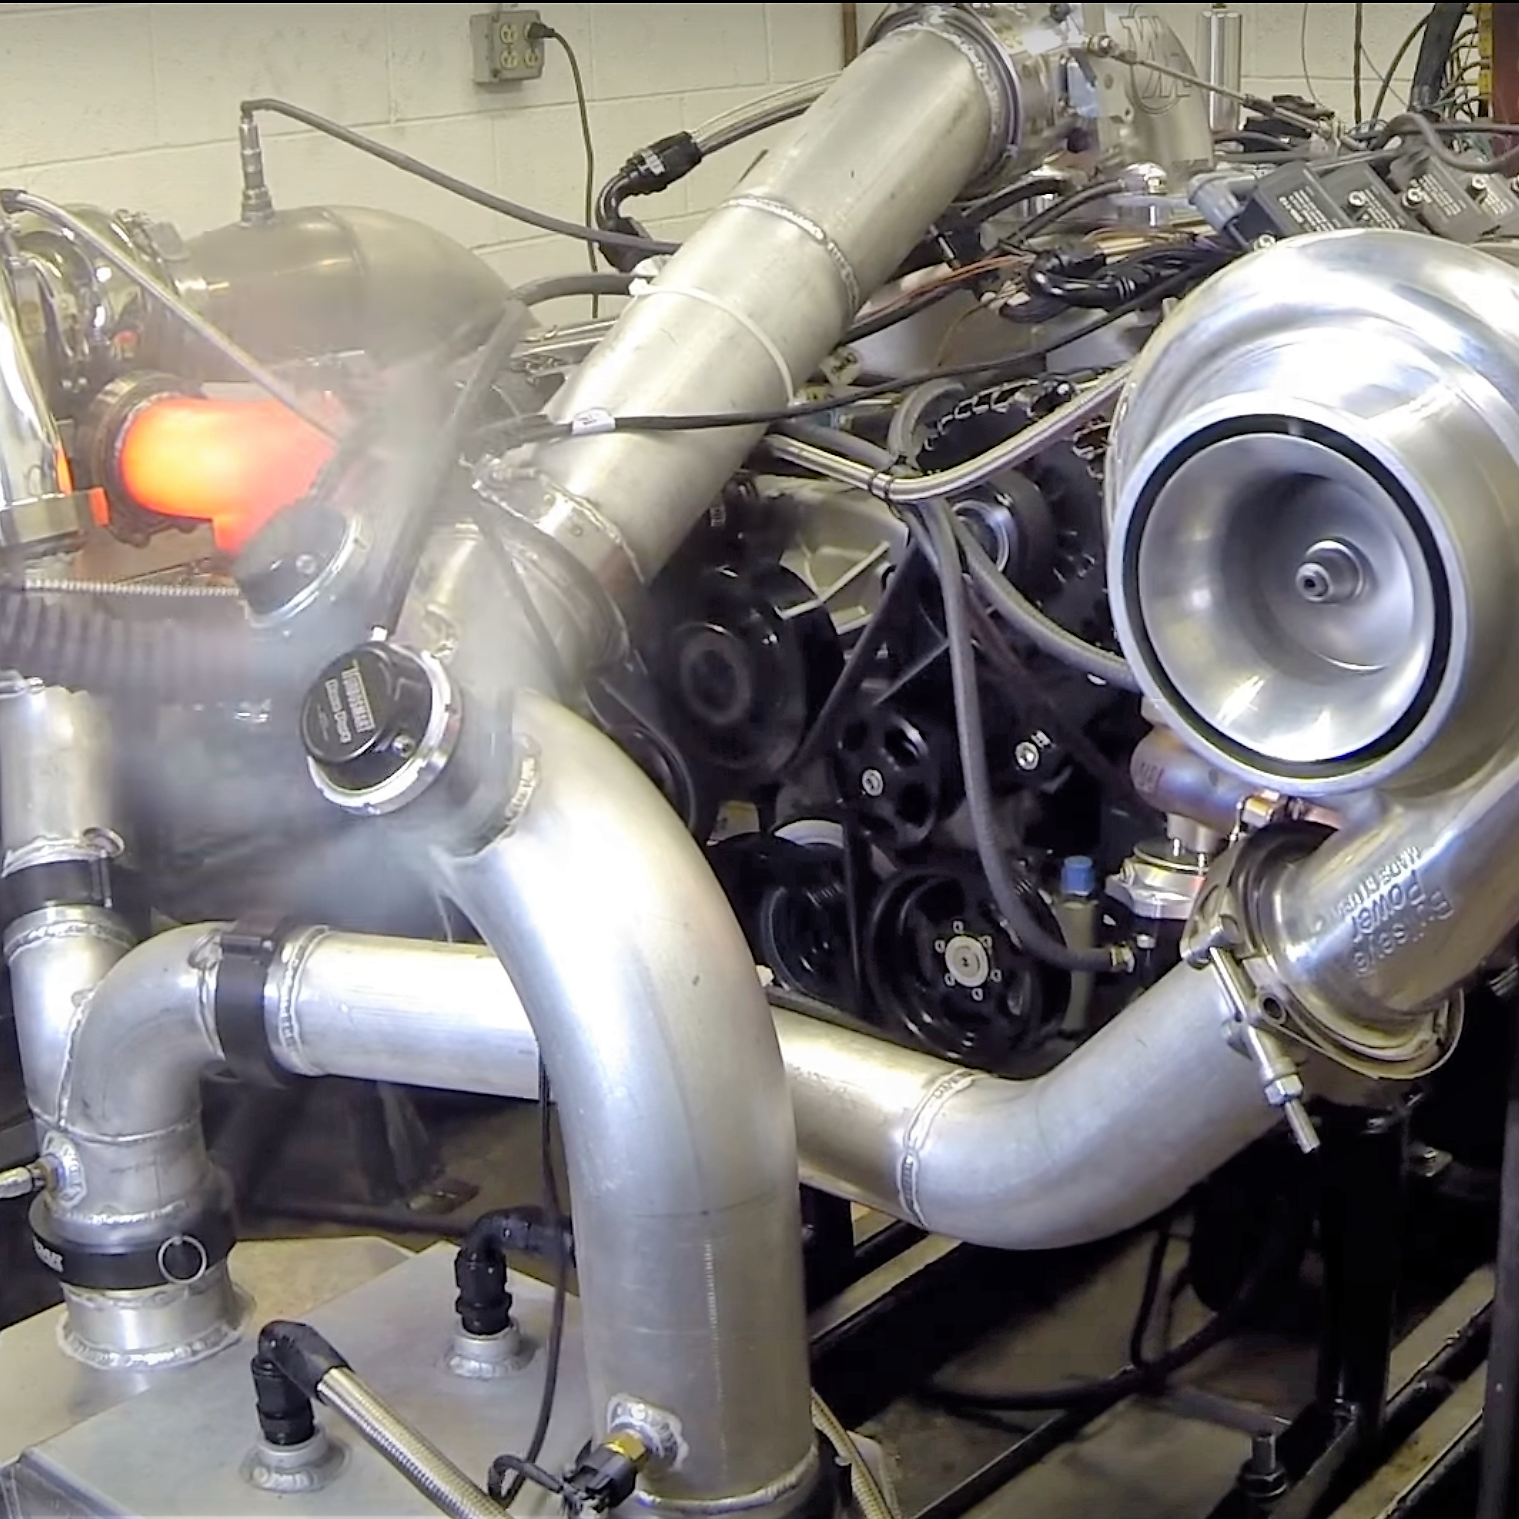 3,000 hp rated, R/T Twin Turbo Big Block Chevy Engine, Complete